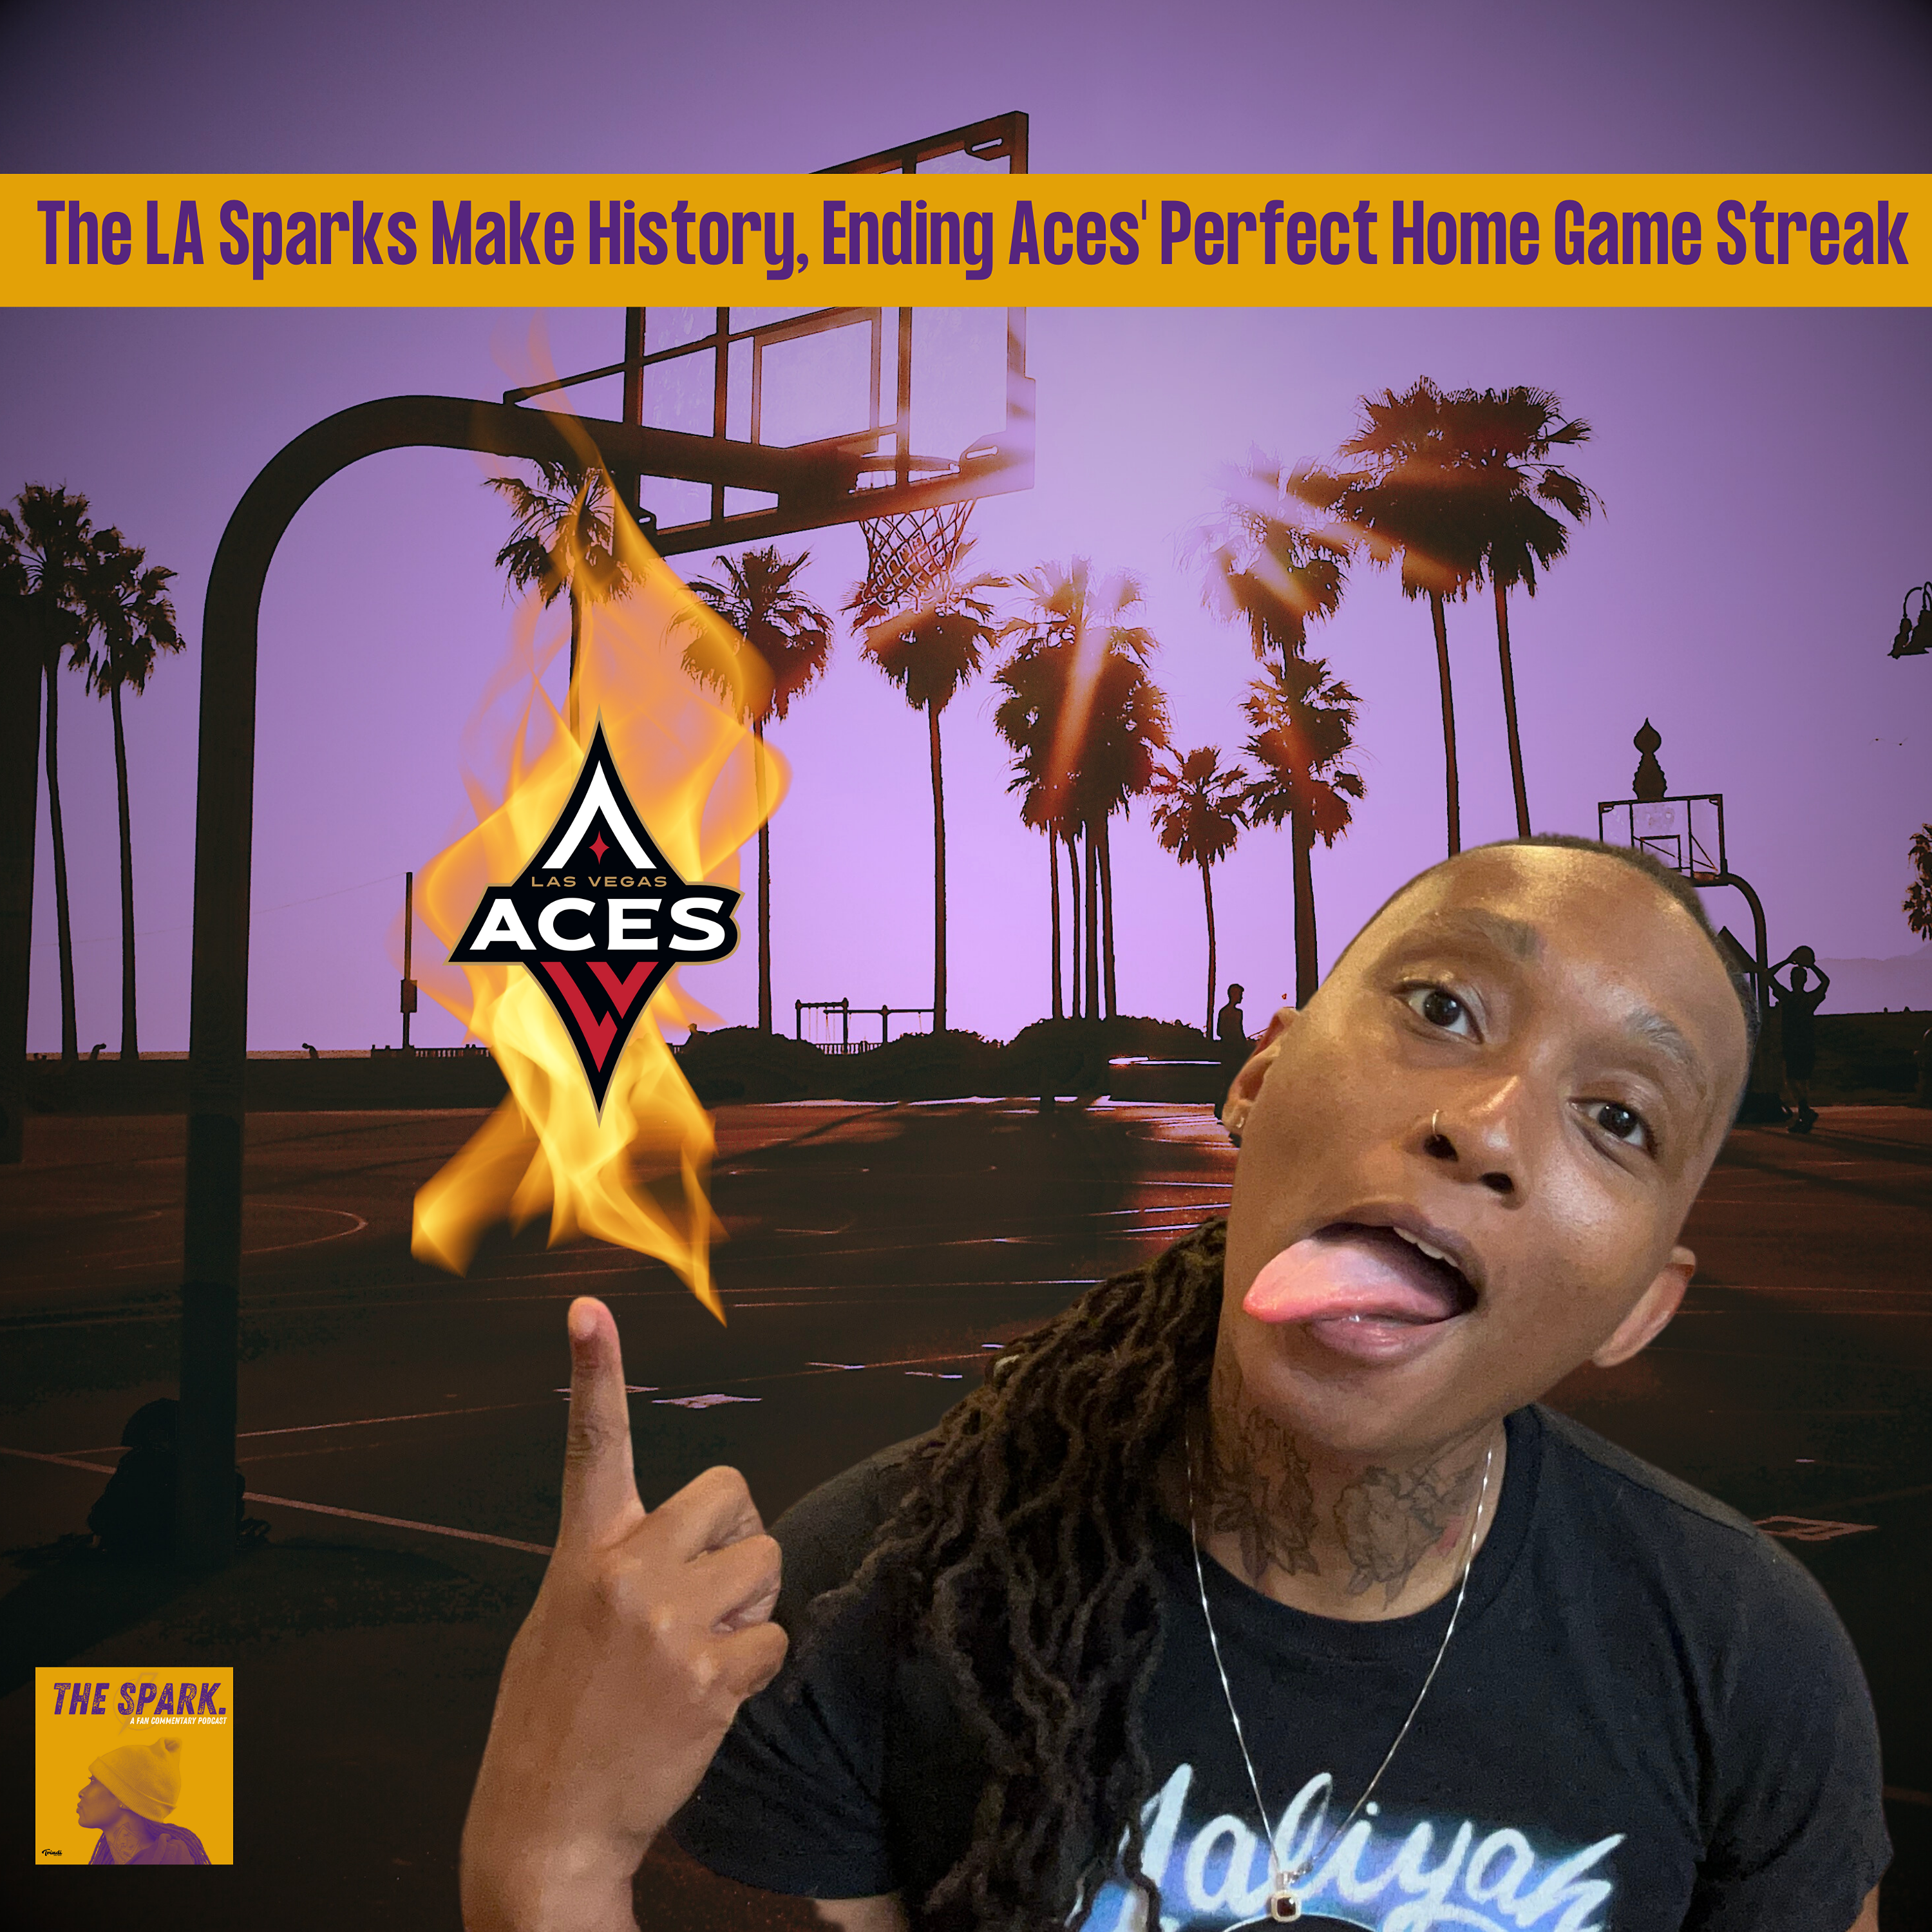 The LA Sparks Make History, Ending Aces' Perfect Home Game Streak